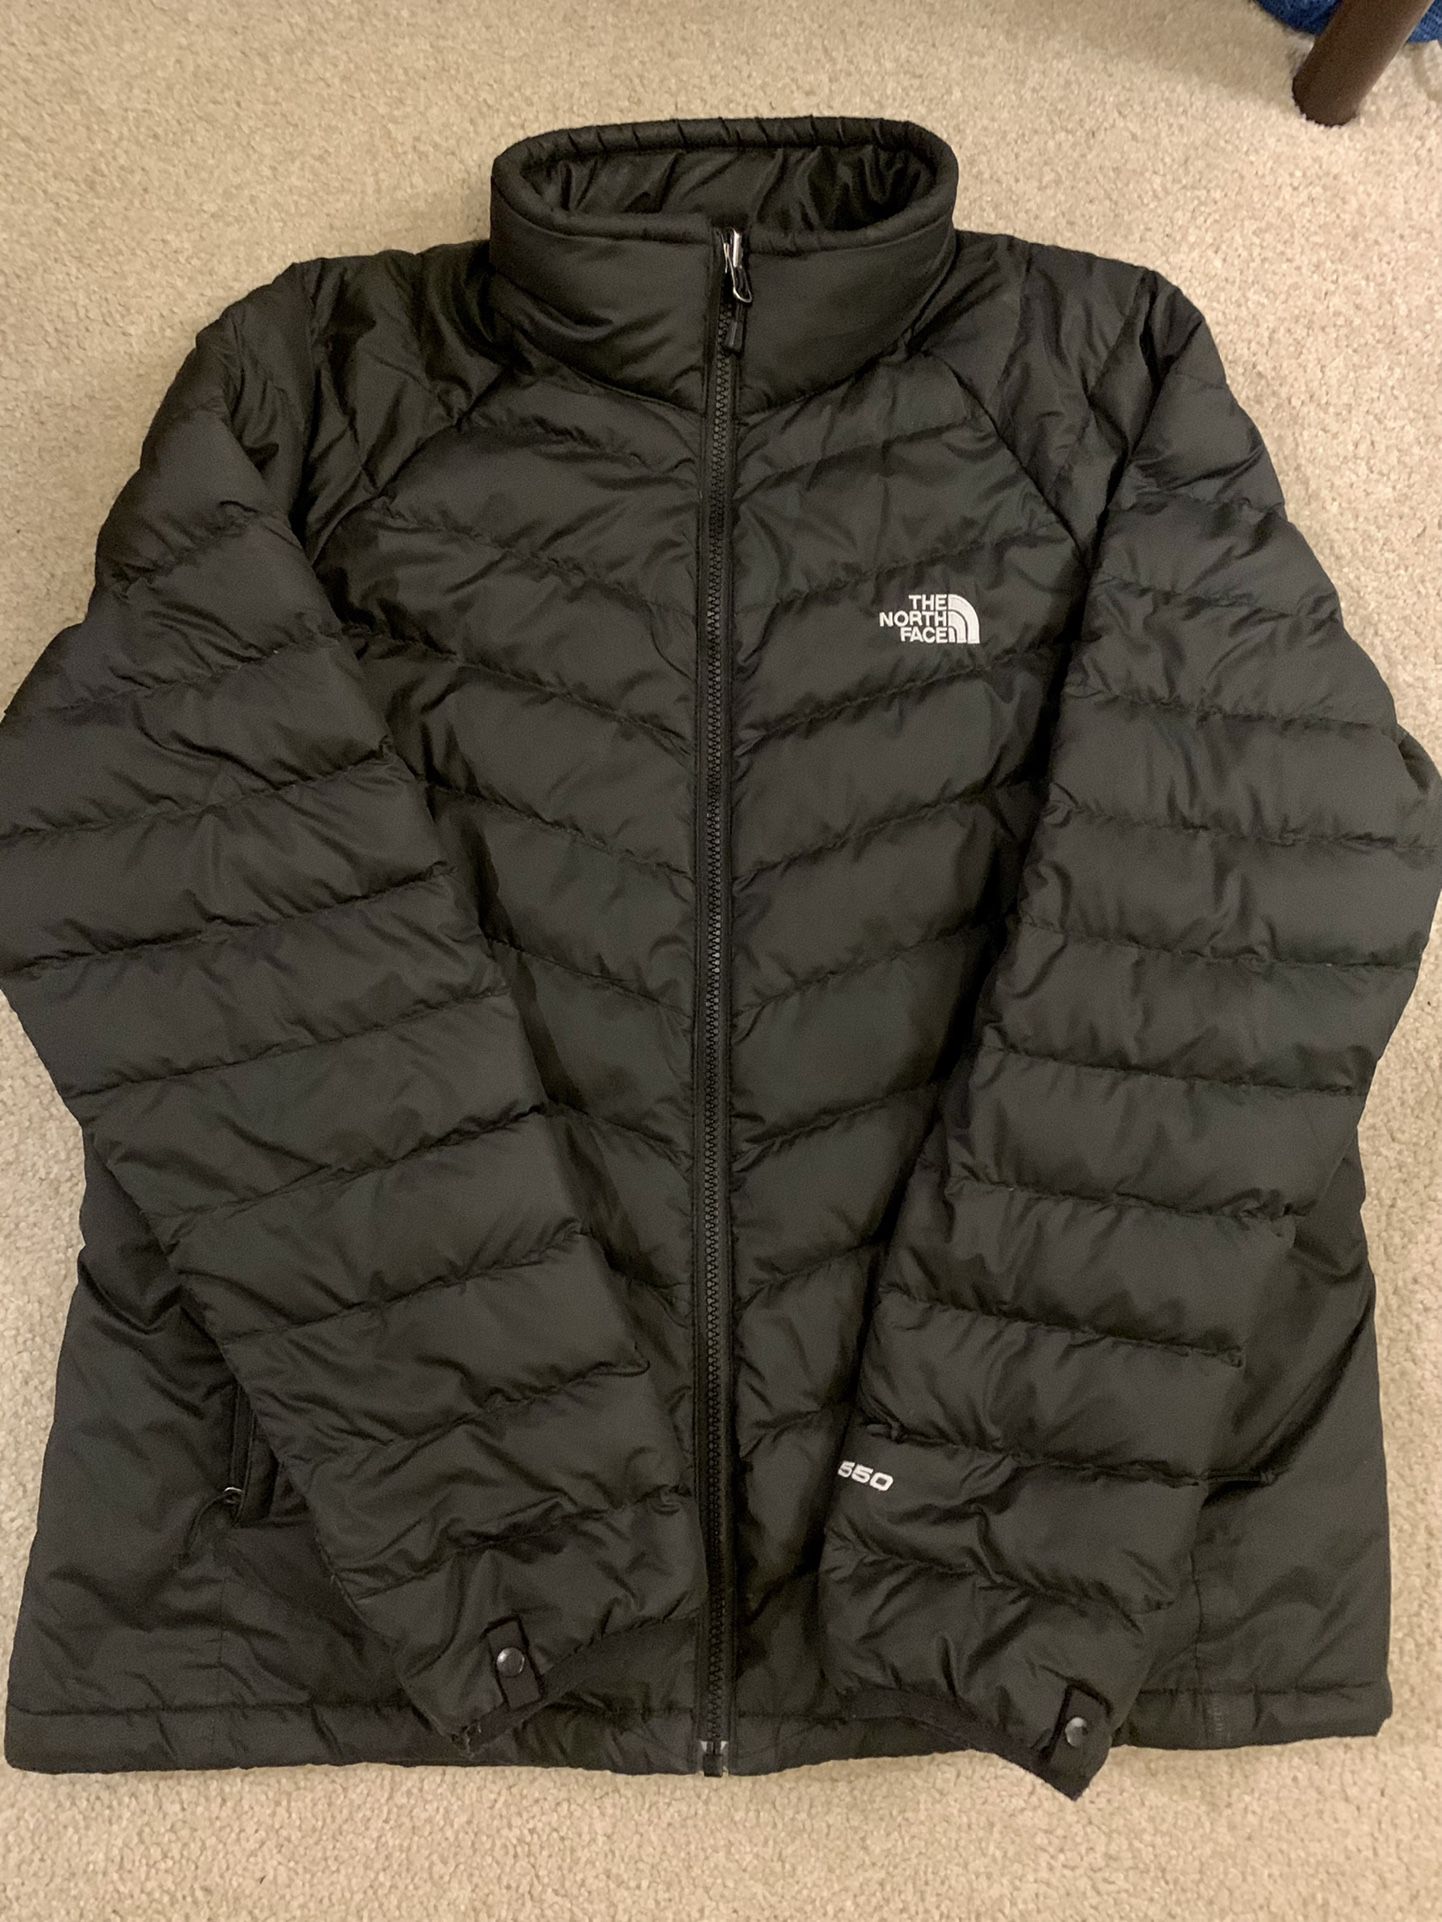 The North Face Women’s XL Jacket